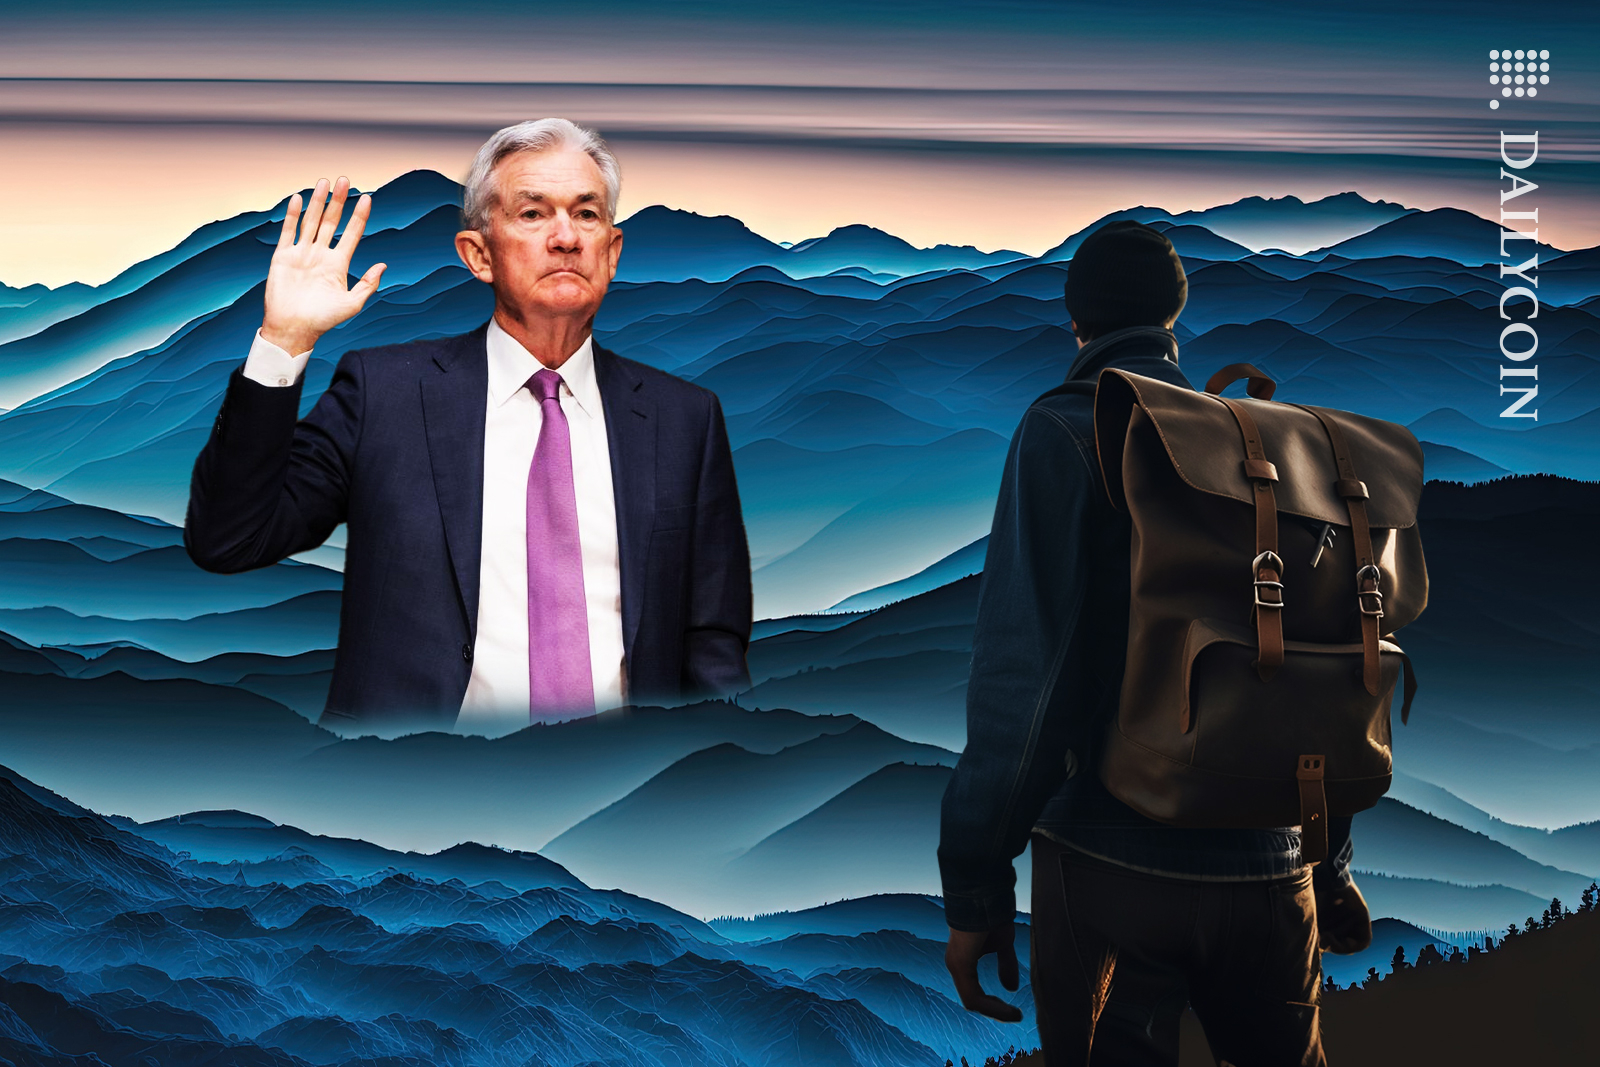 A man with a backpack hiking towards a valley surrounded by mountains and is staring at a giant Jeremy Powell with his hand holding up.